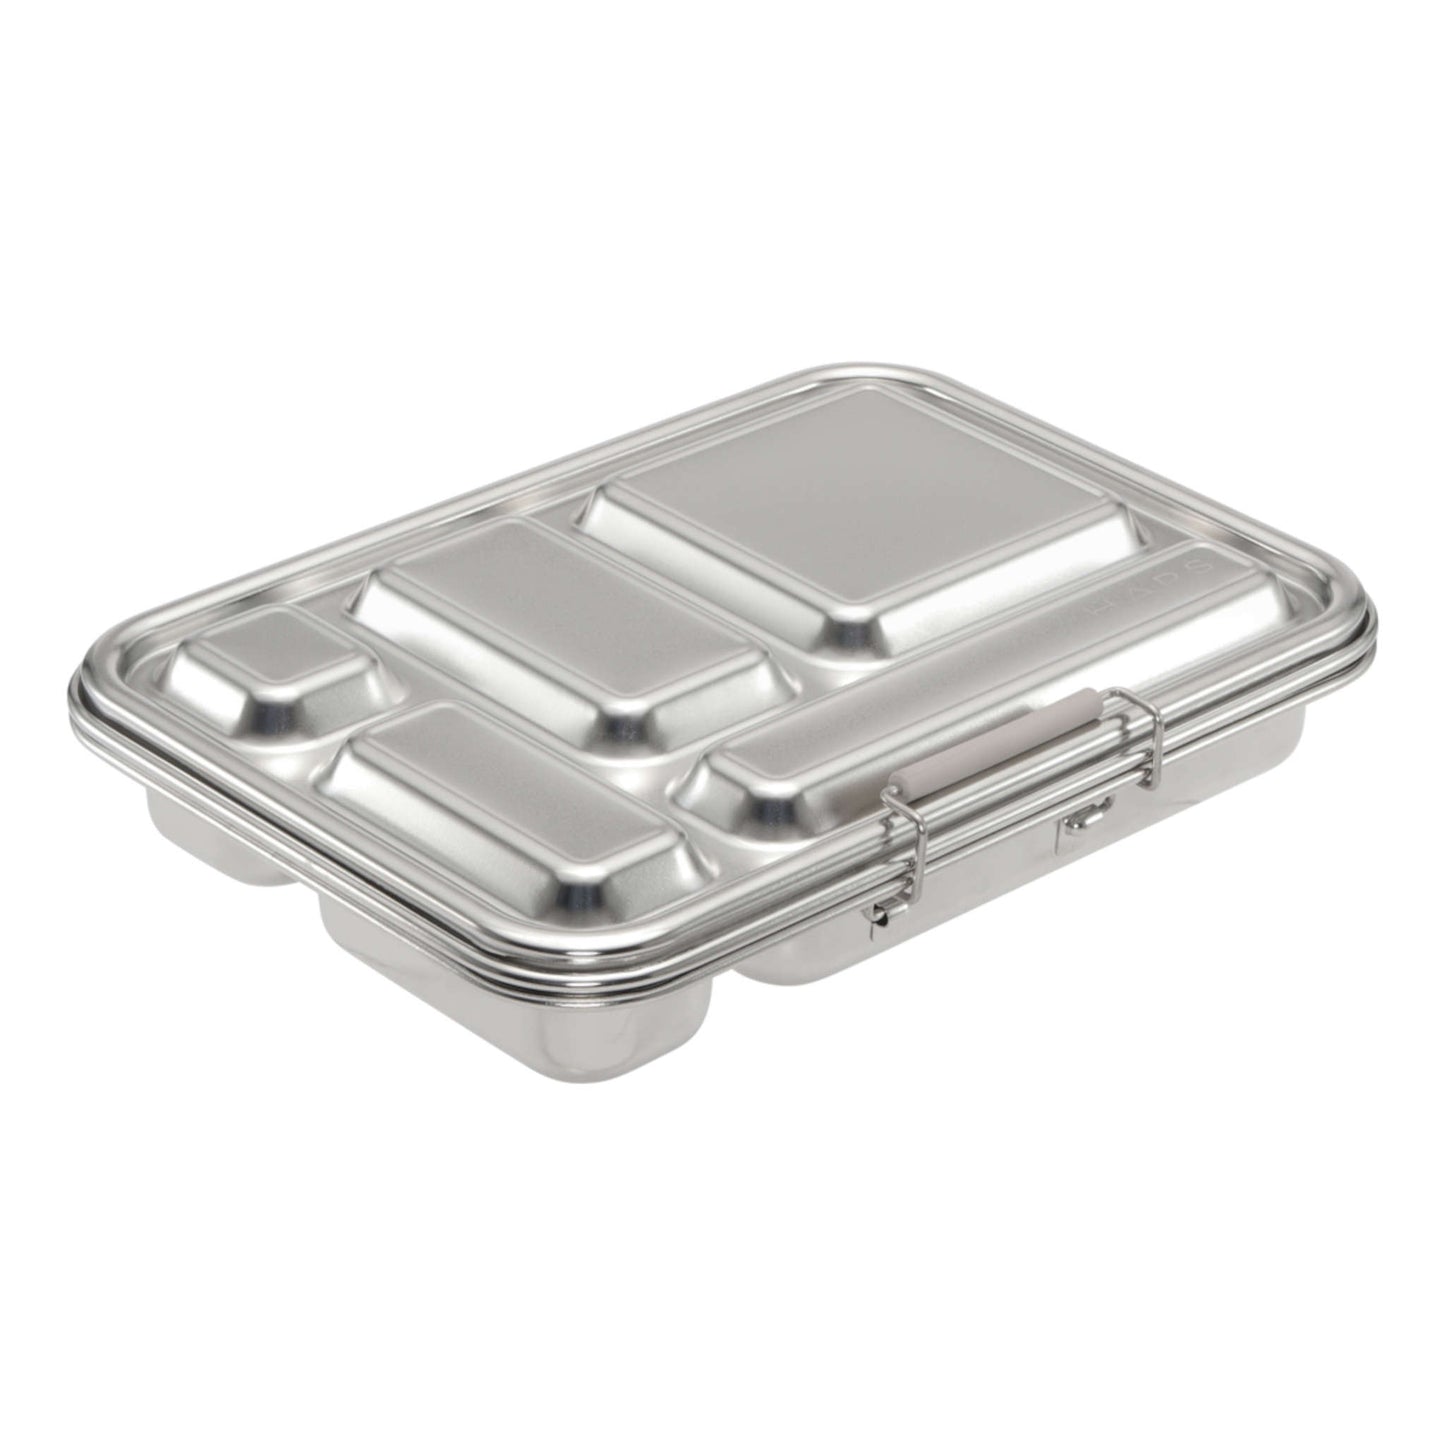 HAPS food box with 5 compartments